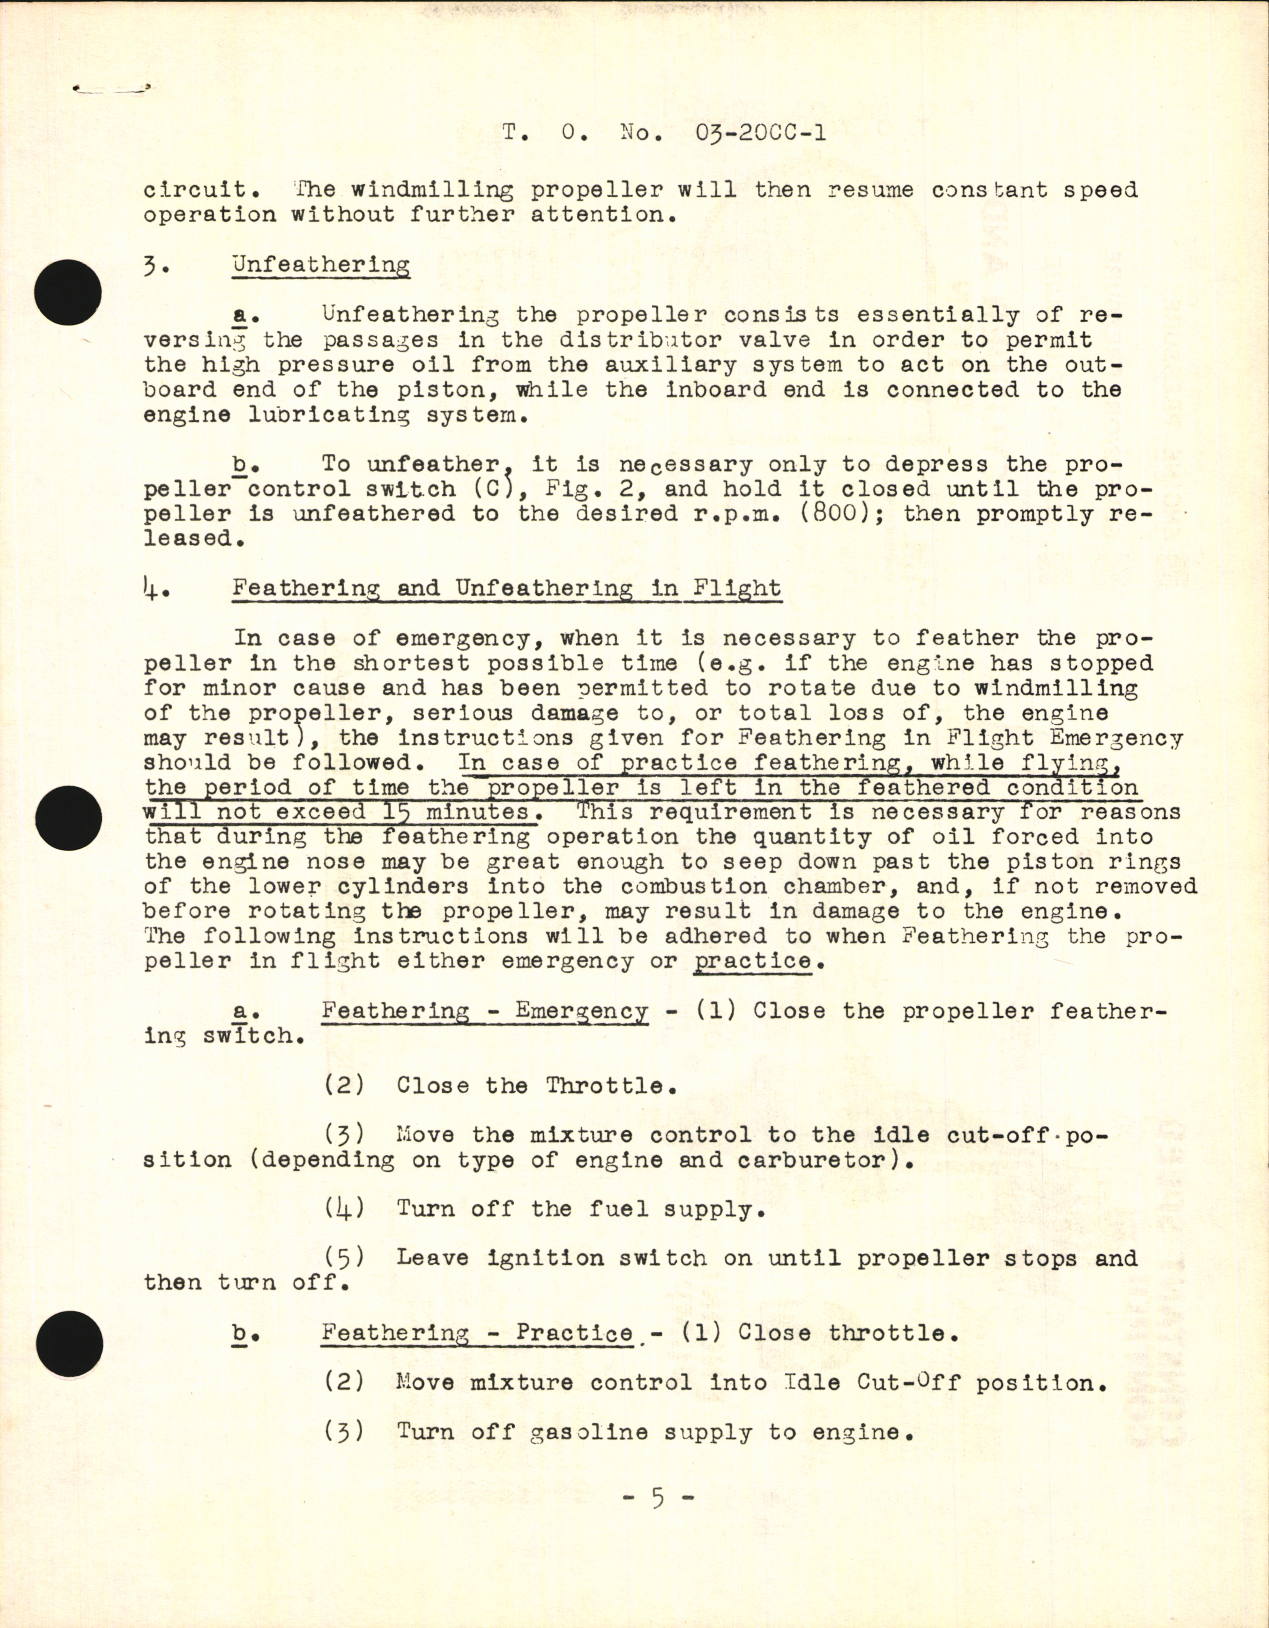 Sample page 7 from AirCorps Library document: Operation & Flight Instructions for the Hydromatic Controllable Propeller (Full Feathering)